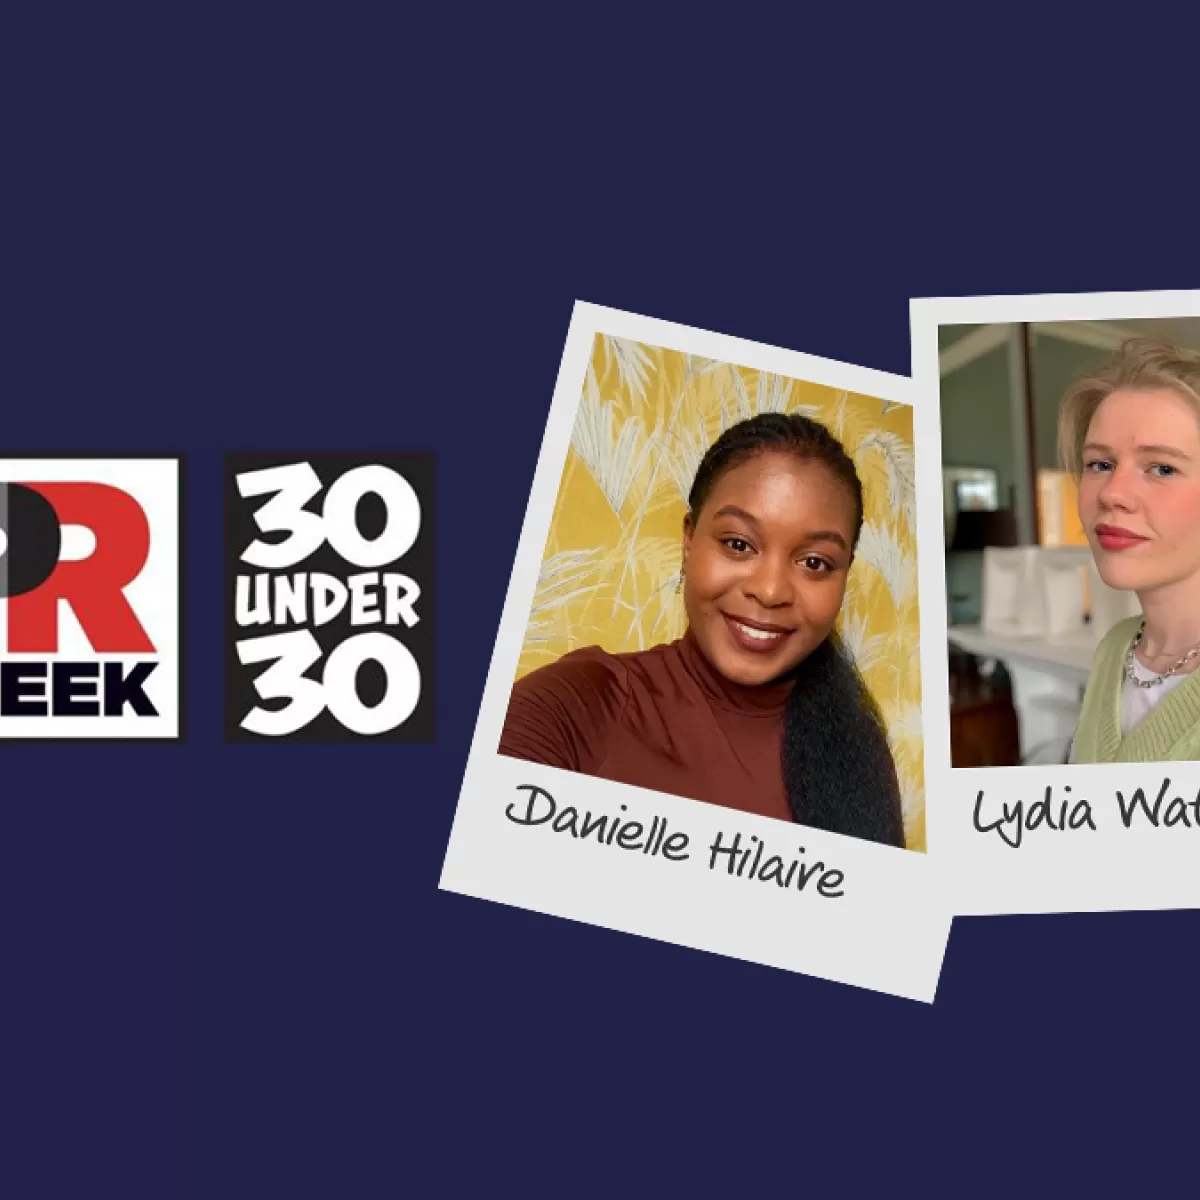 News PR Week30under30 Danielle and Lydia 2021 222148 1200px 2021 05 06 143344